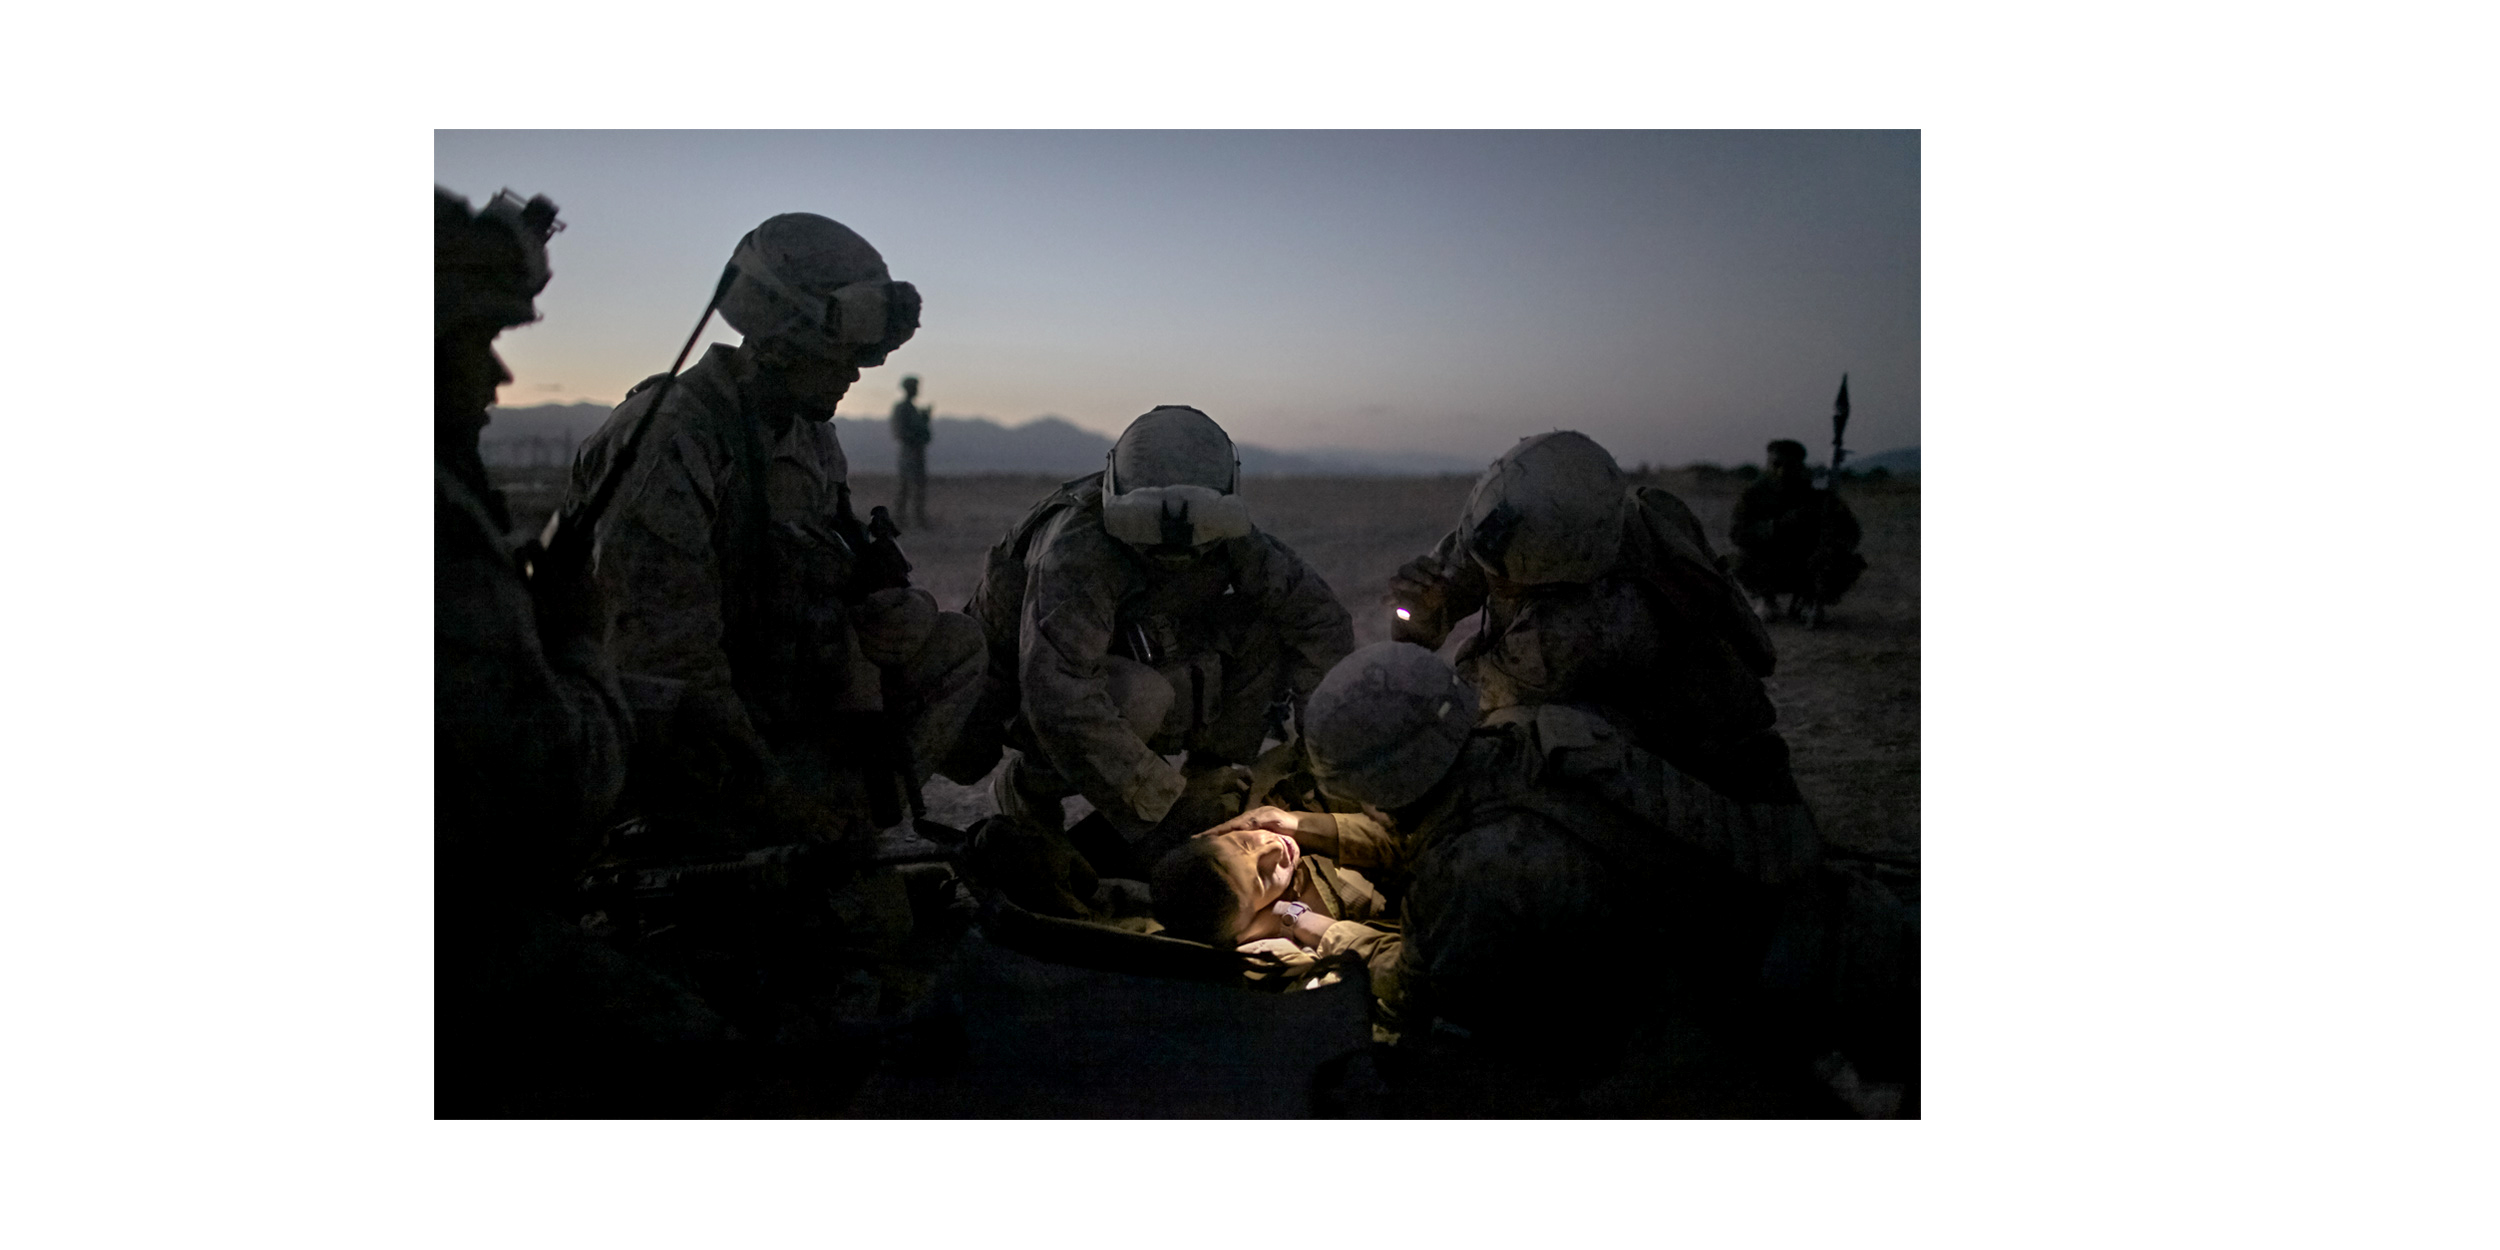  That’s just what Philip Cheung’s series The Thing About Remembering accomplishes. Cheung’s work draws the viewer into the daily life on the Kandahar Airfield in Afghanistan, reminding us that the United States is still in the midst of a war. From 20